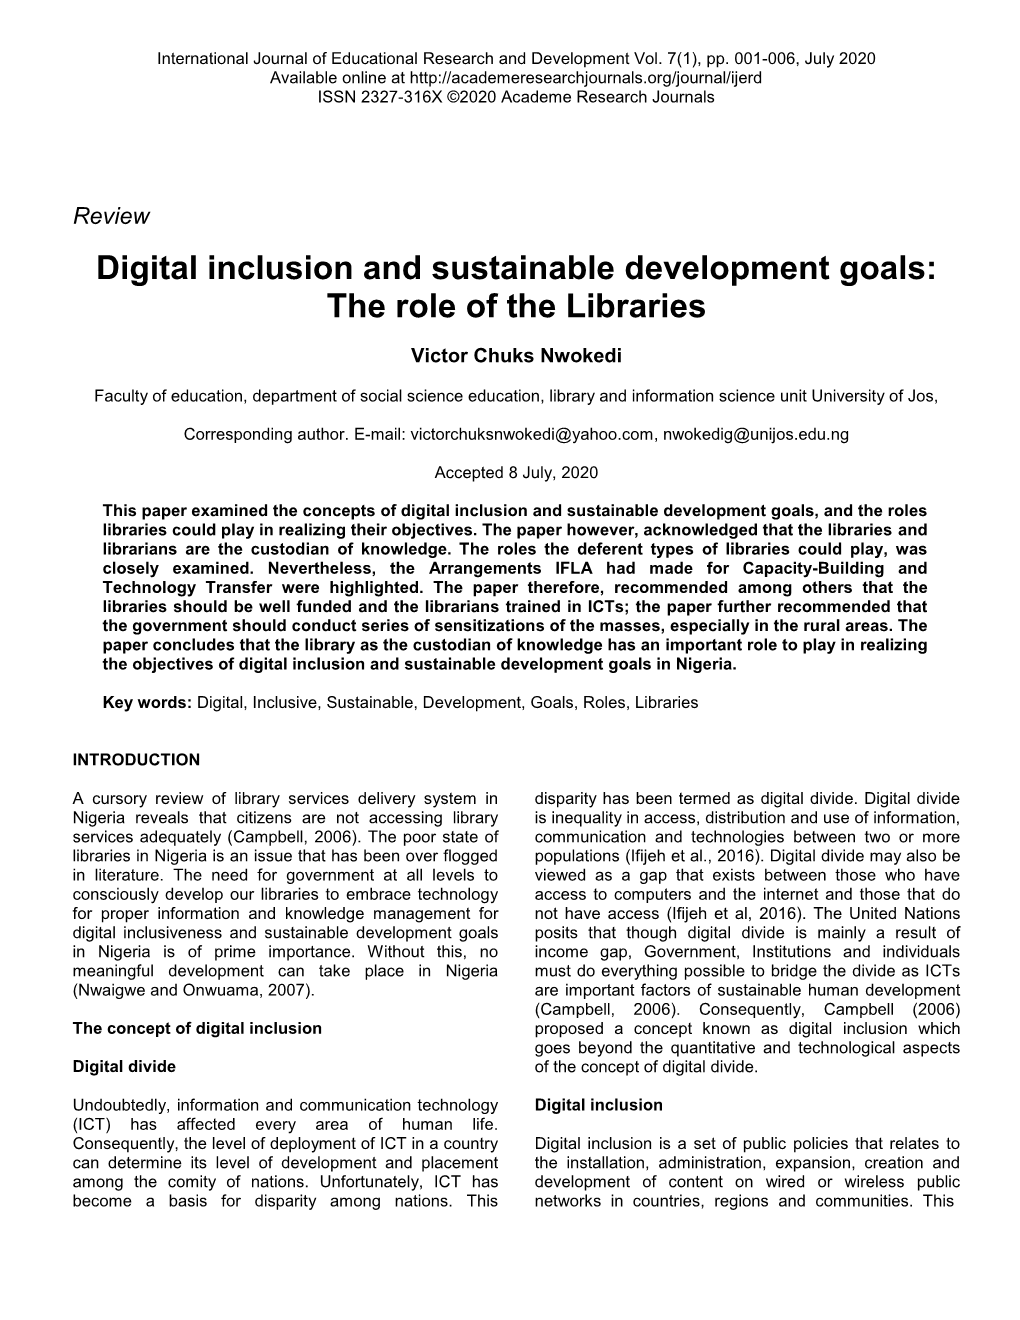 Digital Inclusion and Sustainable Development Goals: the Role of the Libraries